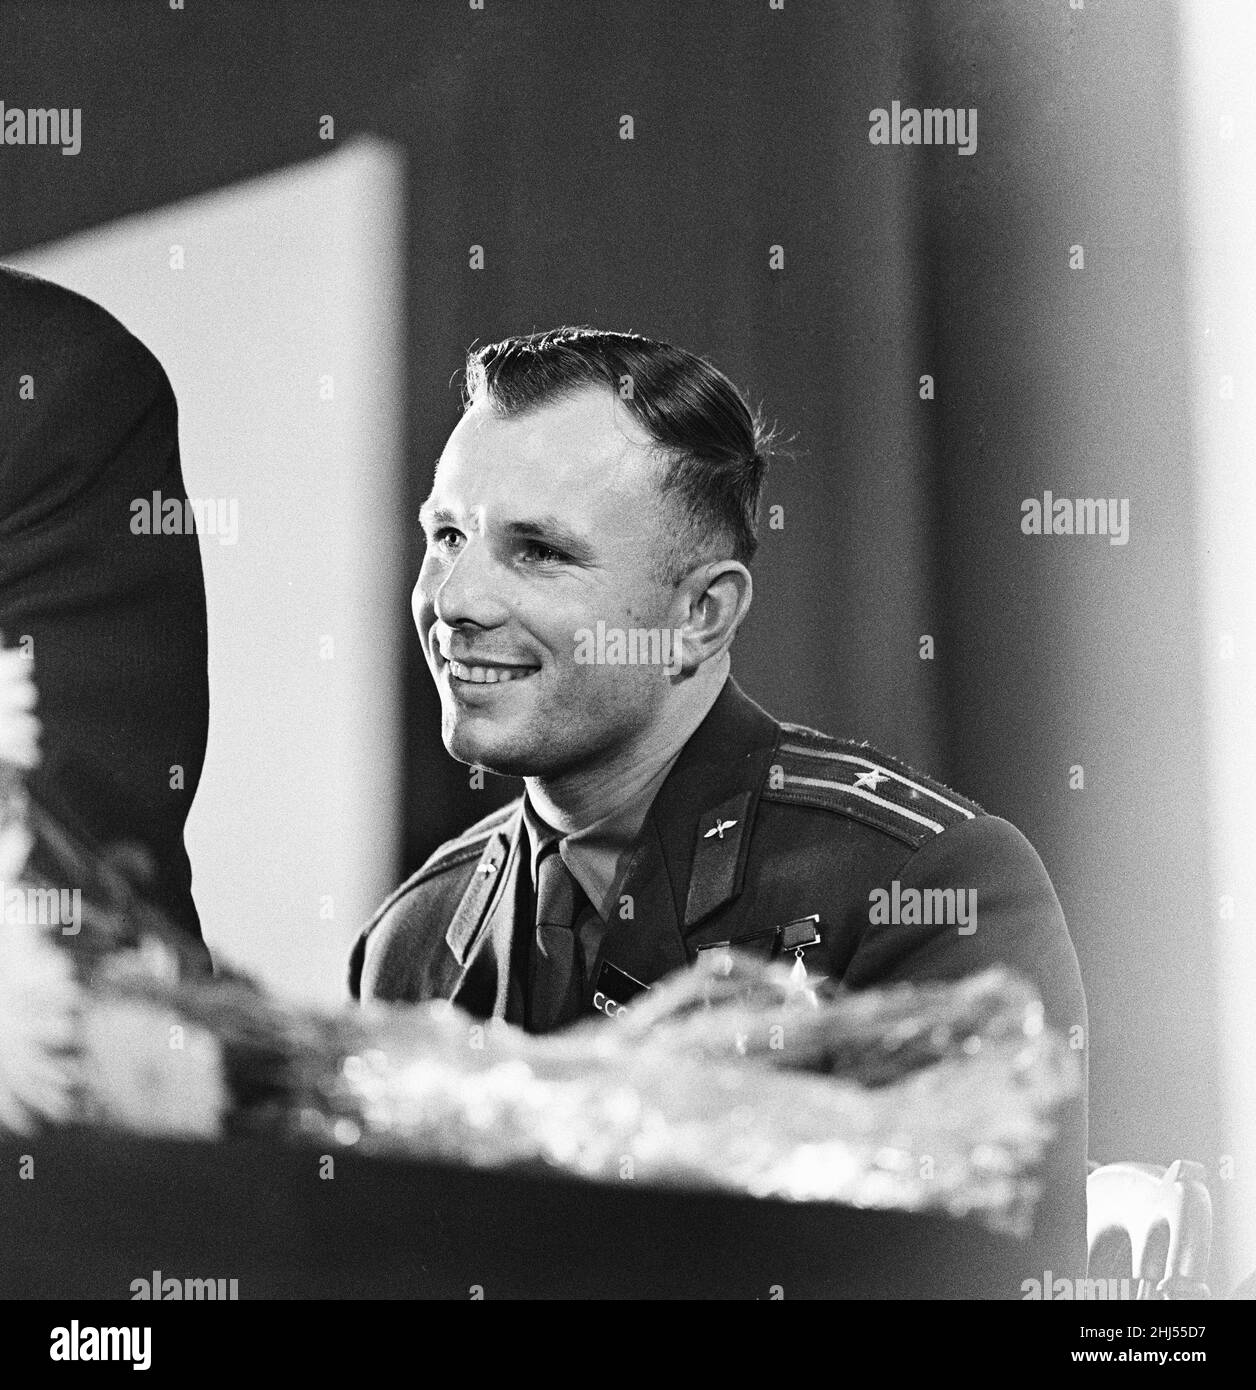 Yuri Gagarin,  Soviet Cosmonaut, the first human to journey into outer space when his Vostok spacecraft completed an orbit of the Earth (12th April 1961), visits Britain, Tuesday 11th July 1961. Our picture shows ... Yuri Gagarin attends news press conference at the Russian Embassy, Kensington Palace Gardens, London. Stock Photo